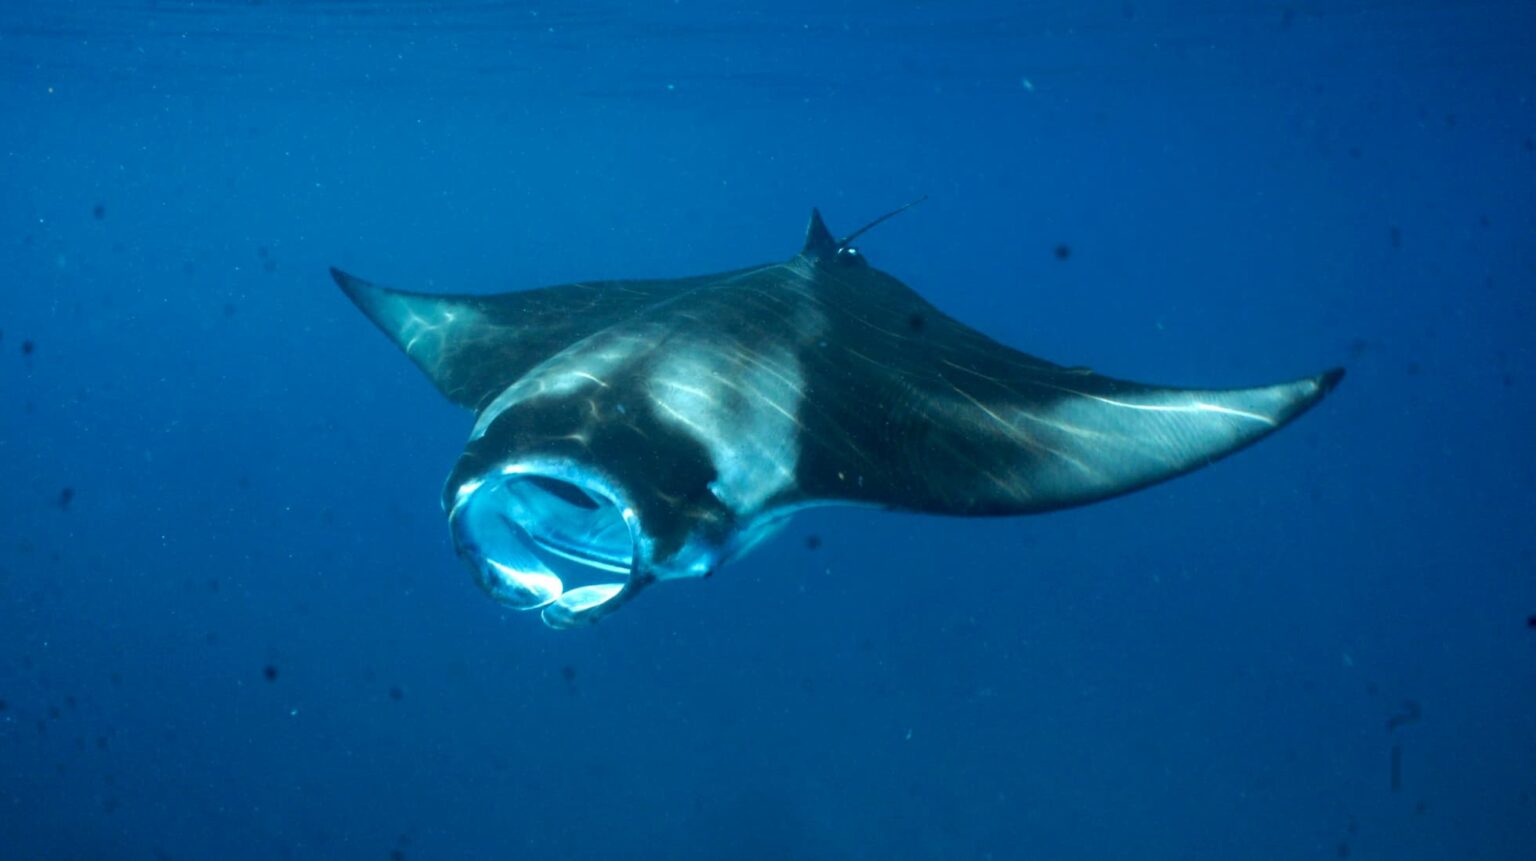 harks, rays and skates, and chimaeras – are now threatened with extinction.